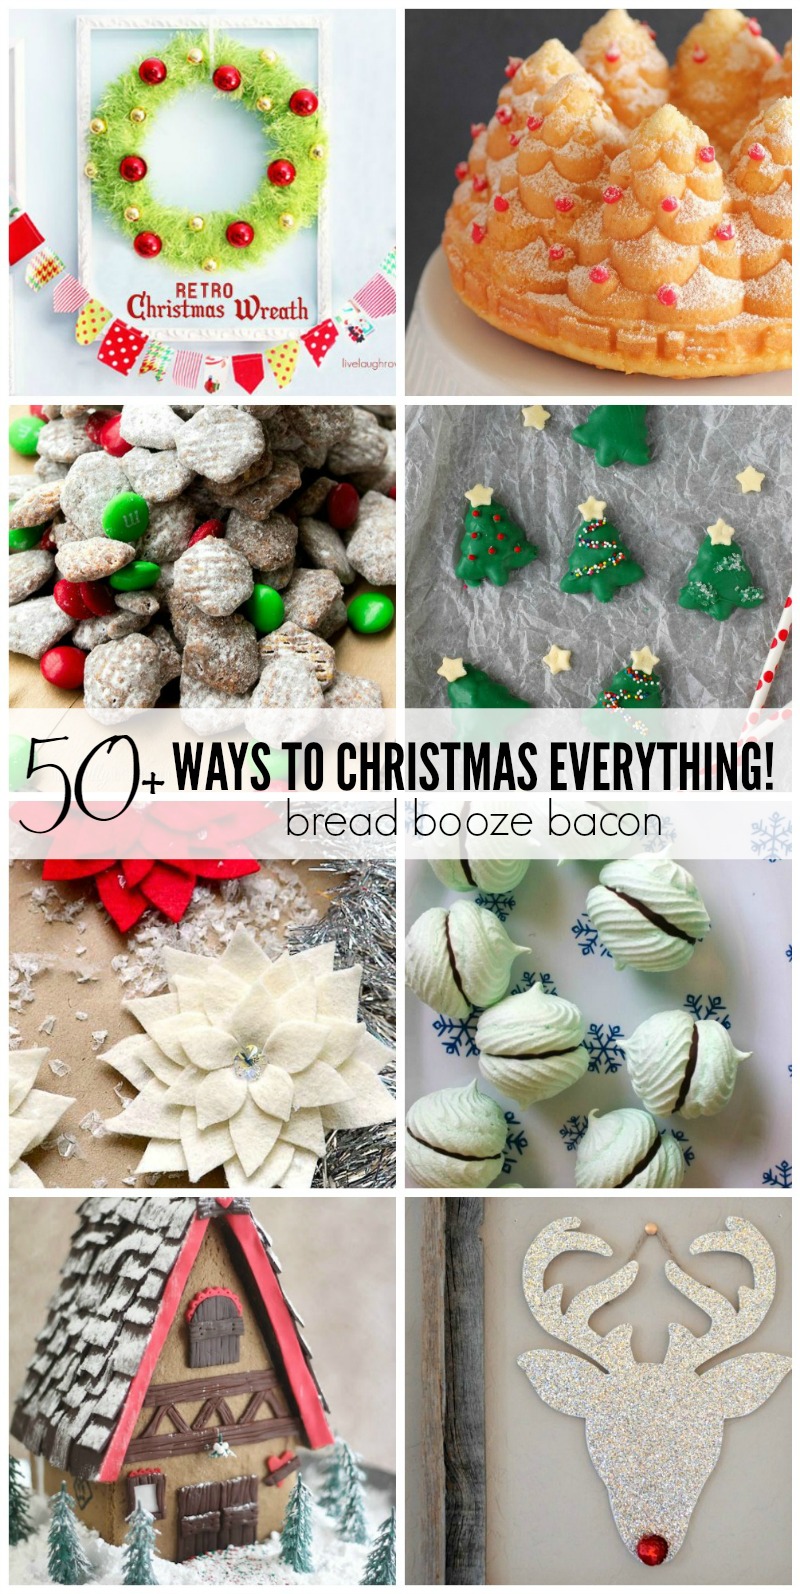 Deck the halls with these fab 50+ Ways to Christmas Everything! You'll find everything from cookies and crafts to decor and drinks to help make your holiday extra special!